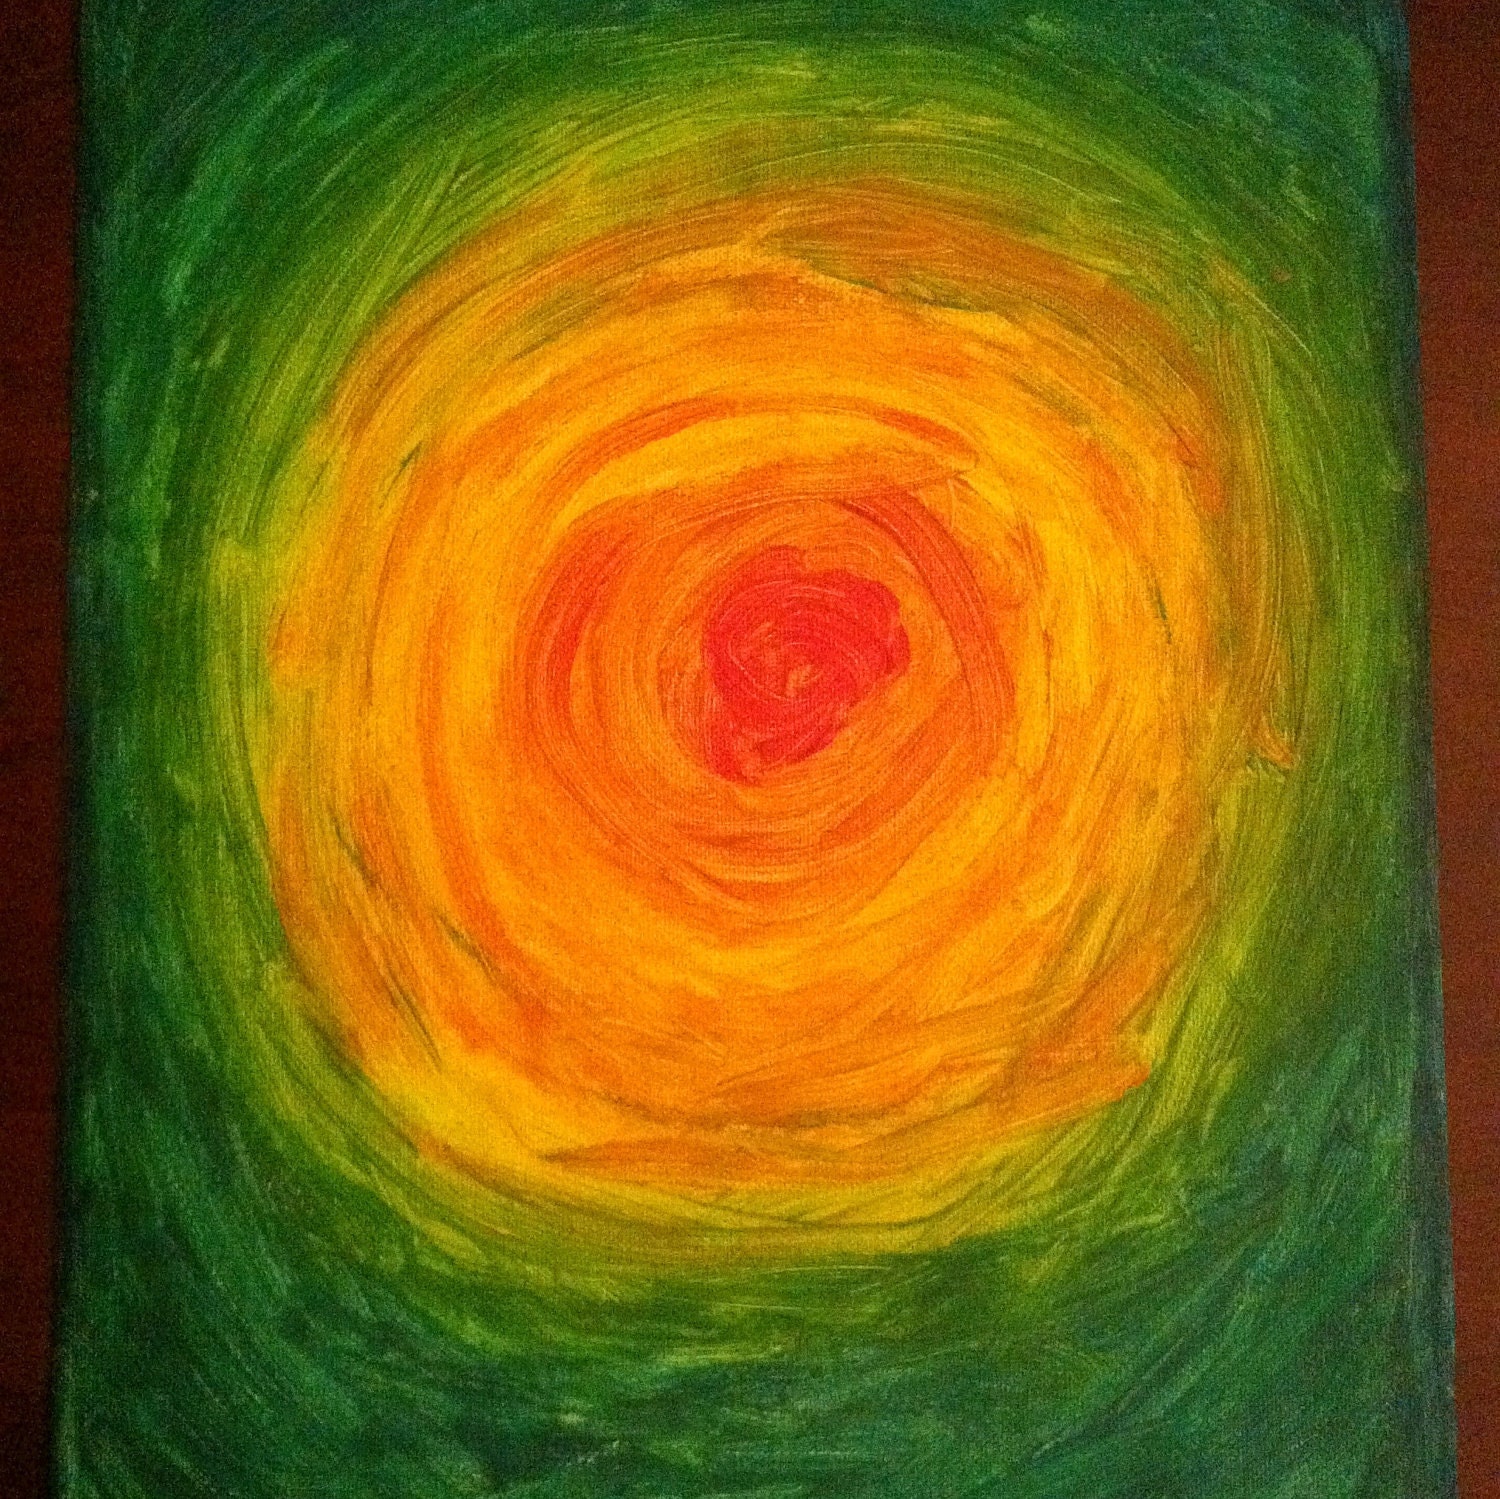 SALE 16"x12" Abstract Acrylic Painting on unstretched canvas OOAK - Black Hole Sun